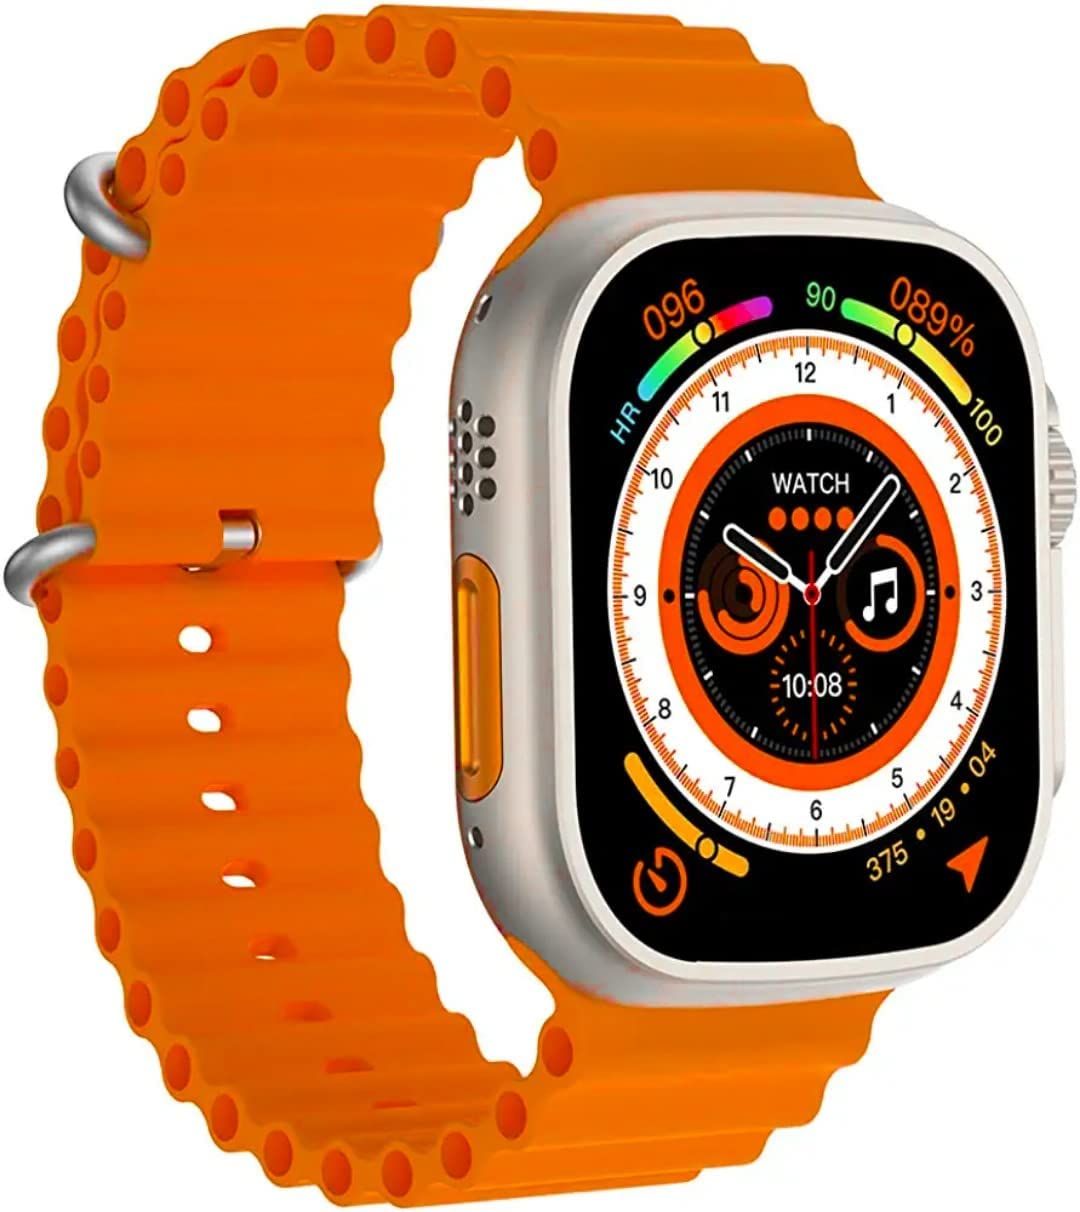 Melbon Wave Astra Bluetooth Calling SmartWatch 1.99" Touch Display | Health Tracking, Sports Tracking, Multiple Watch Faces, Find The Phone, Camera & Music Control Calling Watch (Orange)